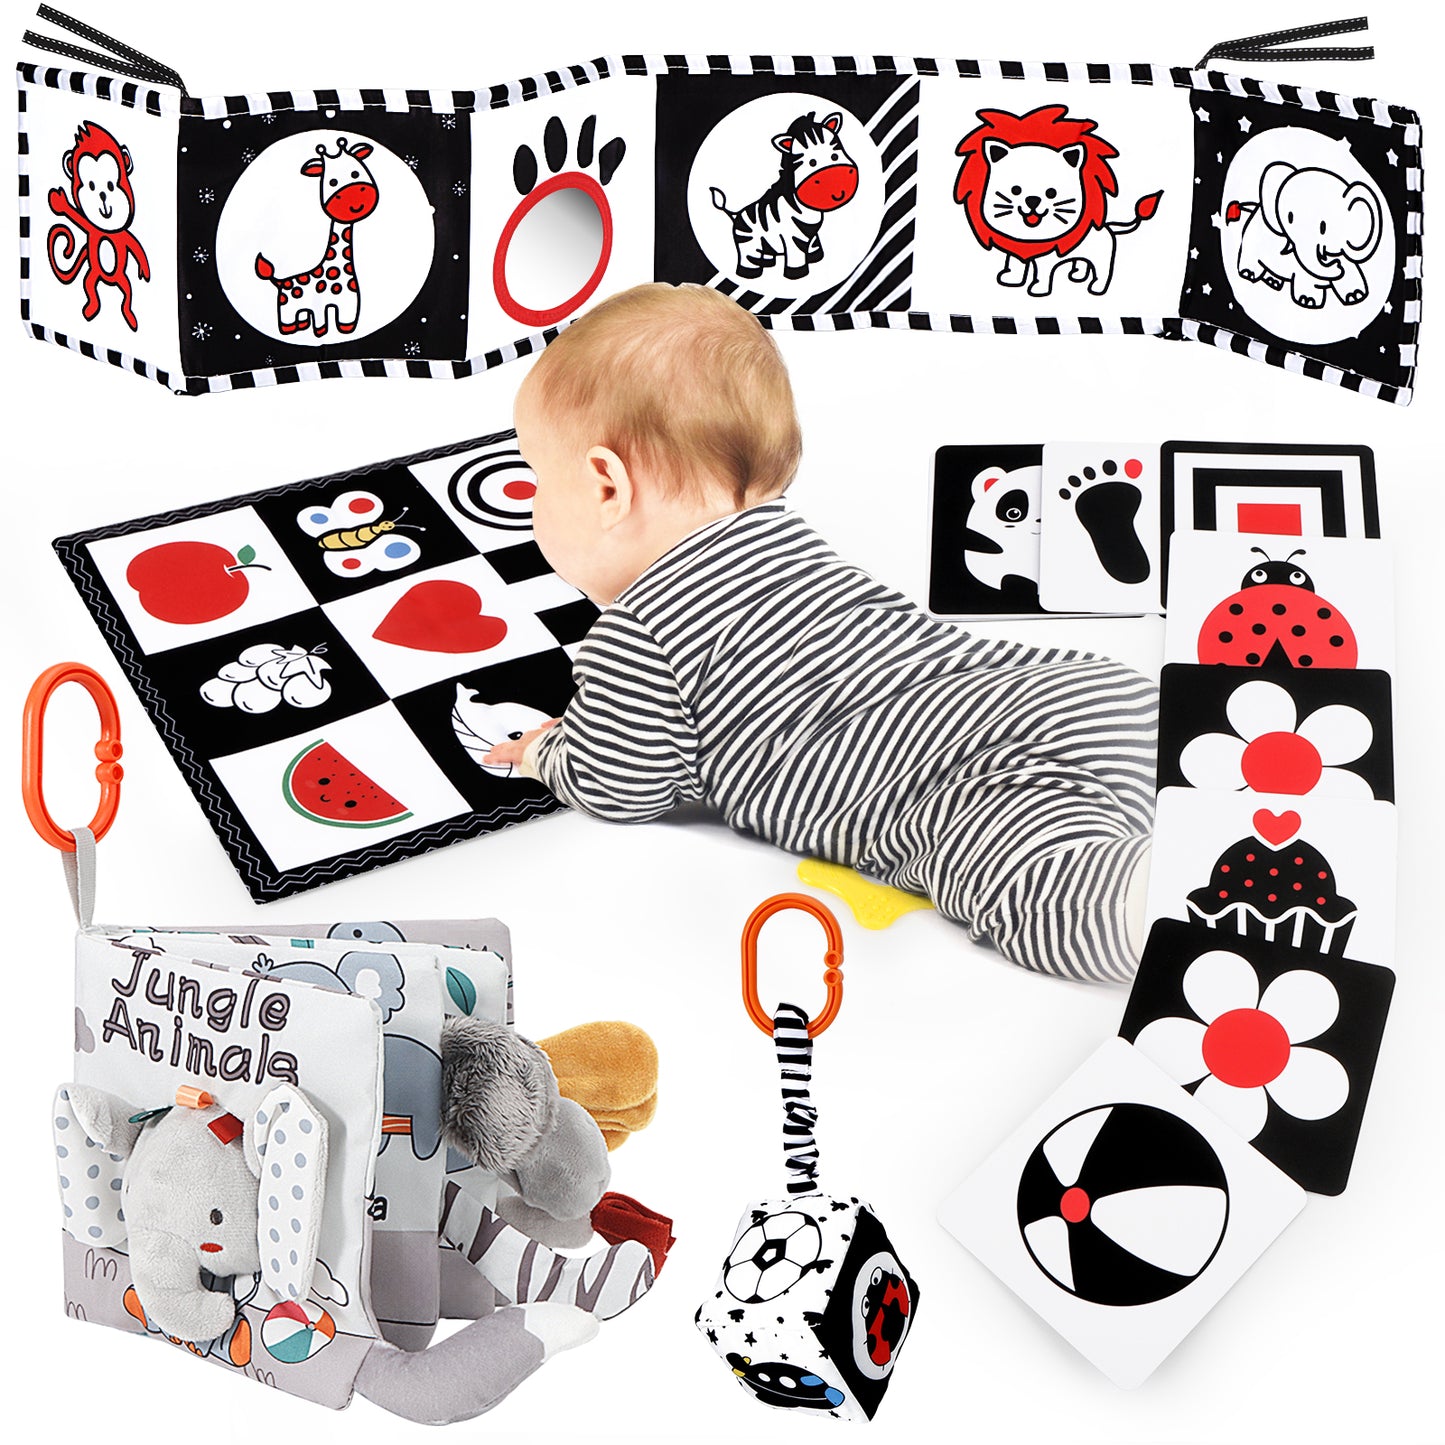 Baby & Newborn Toys, Toys for Toddlers & Infants